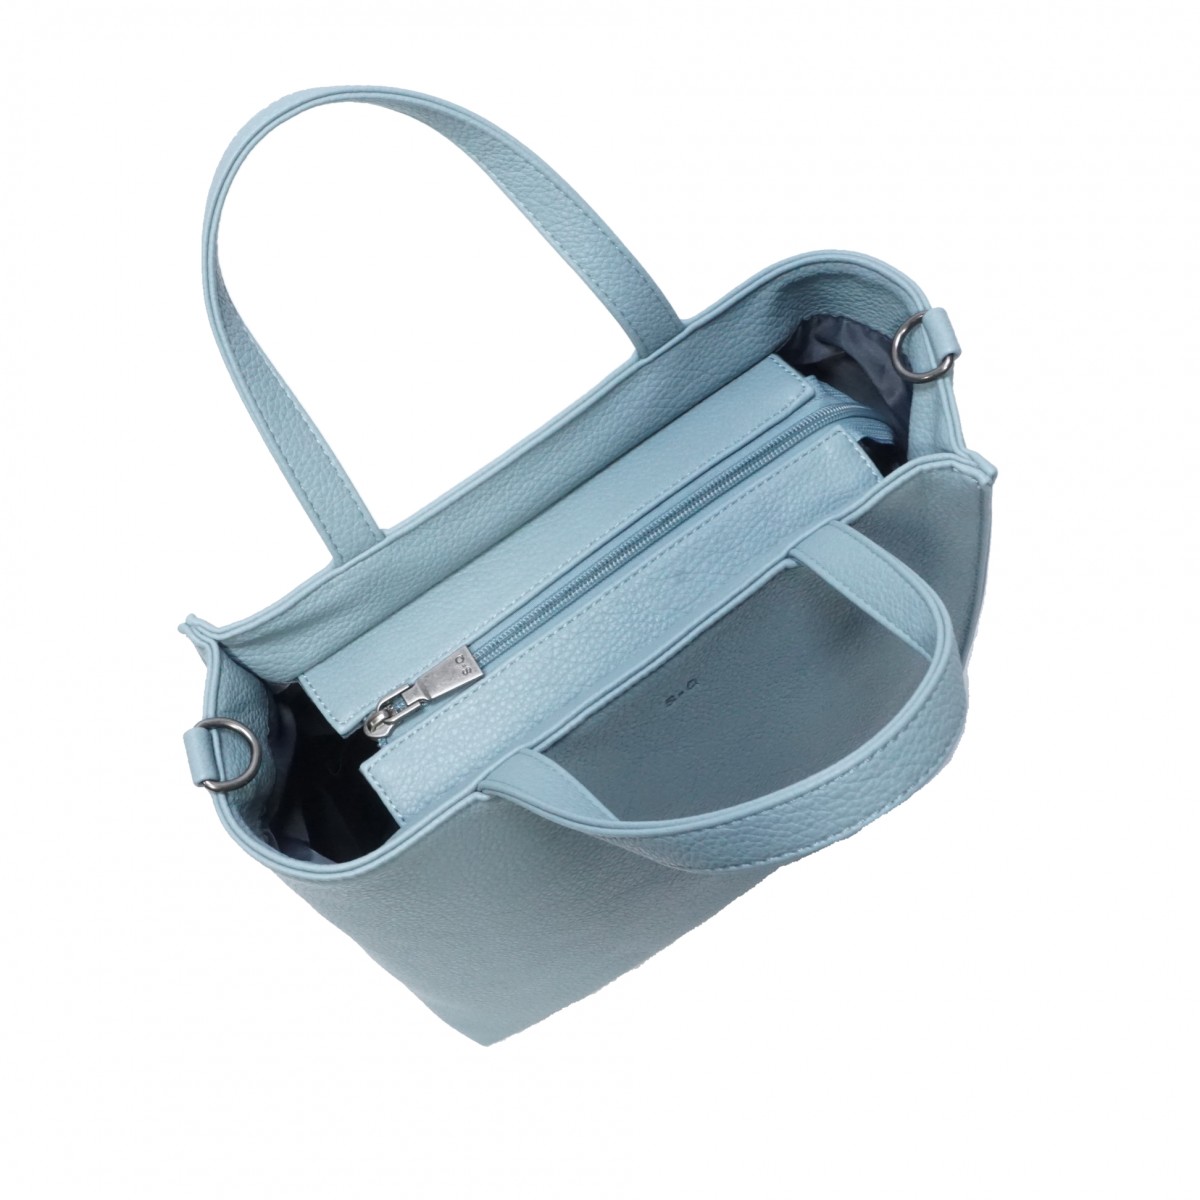 Charlie 2-in-1 Tote - Light Grey